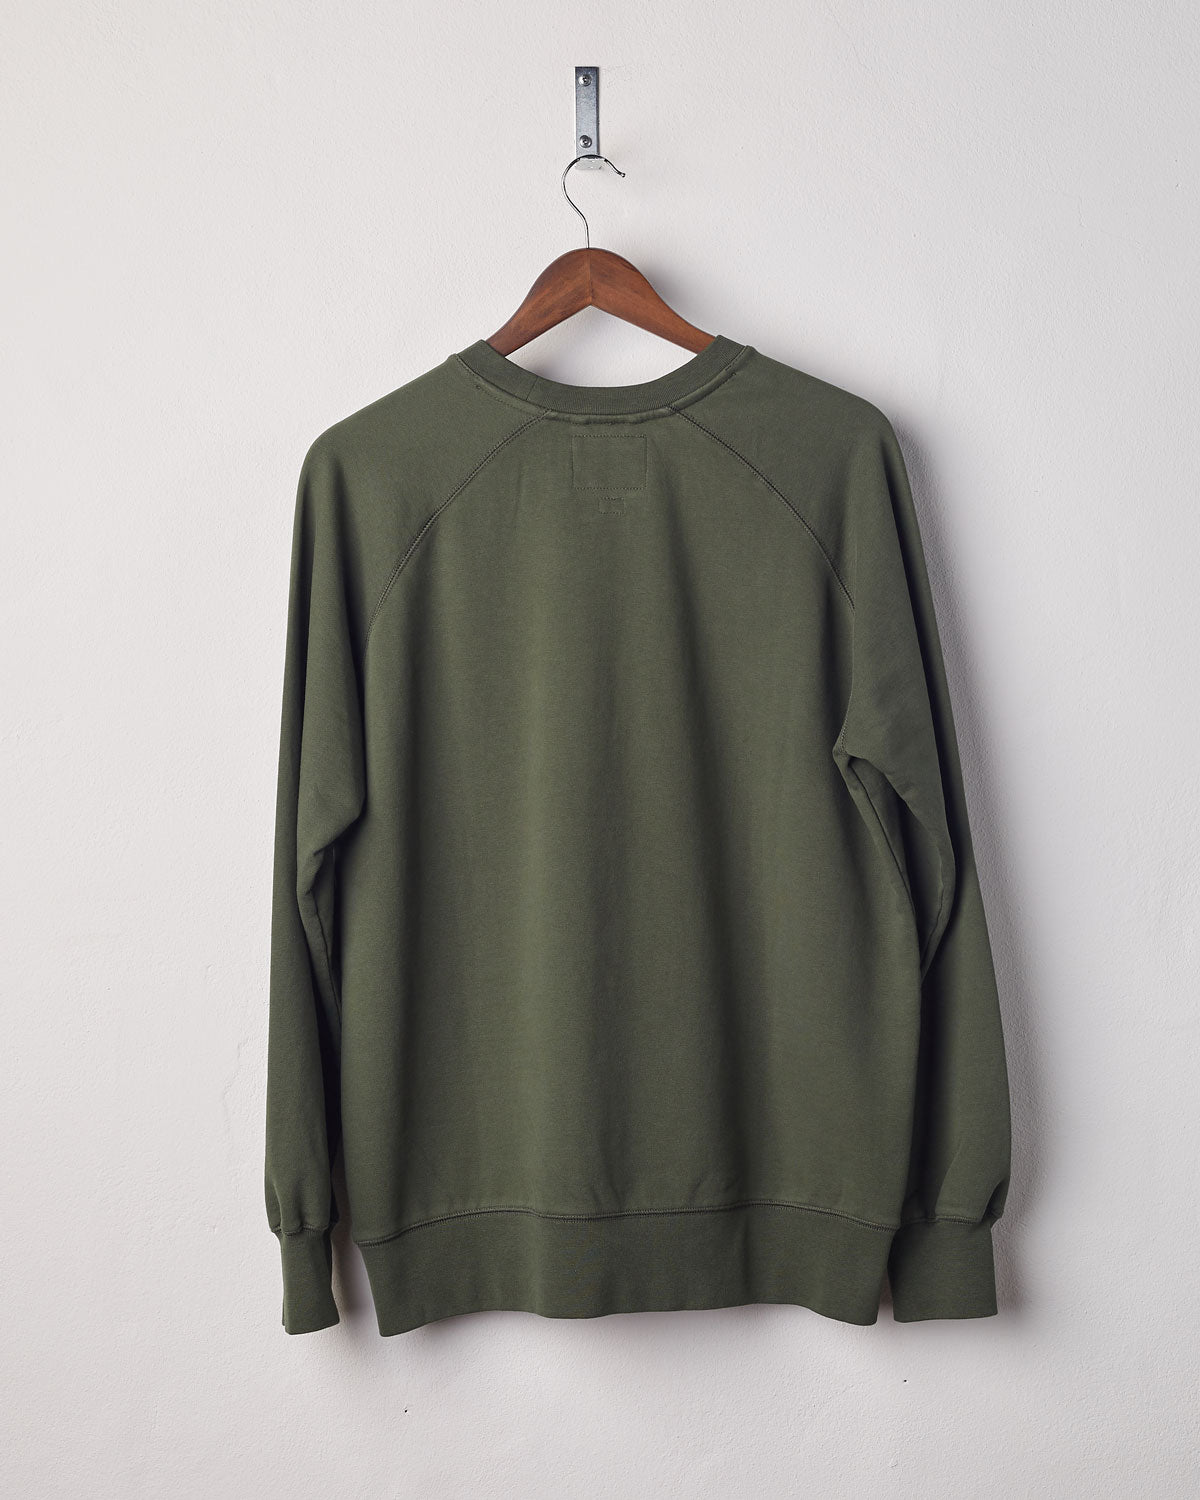 Back view of vine green organic heavyweight cotton #7005 jersey sweatshirt by Uskees presented on hanger.